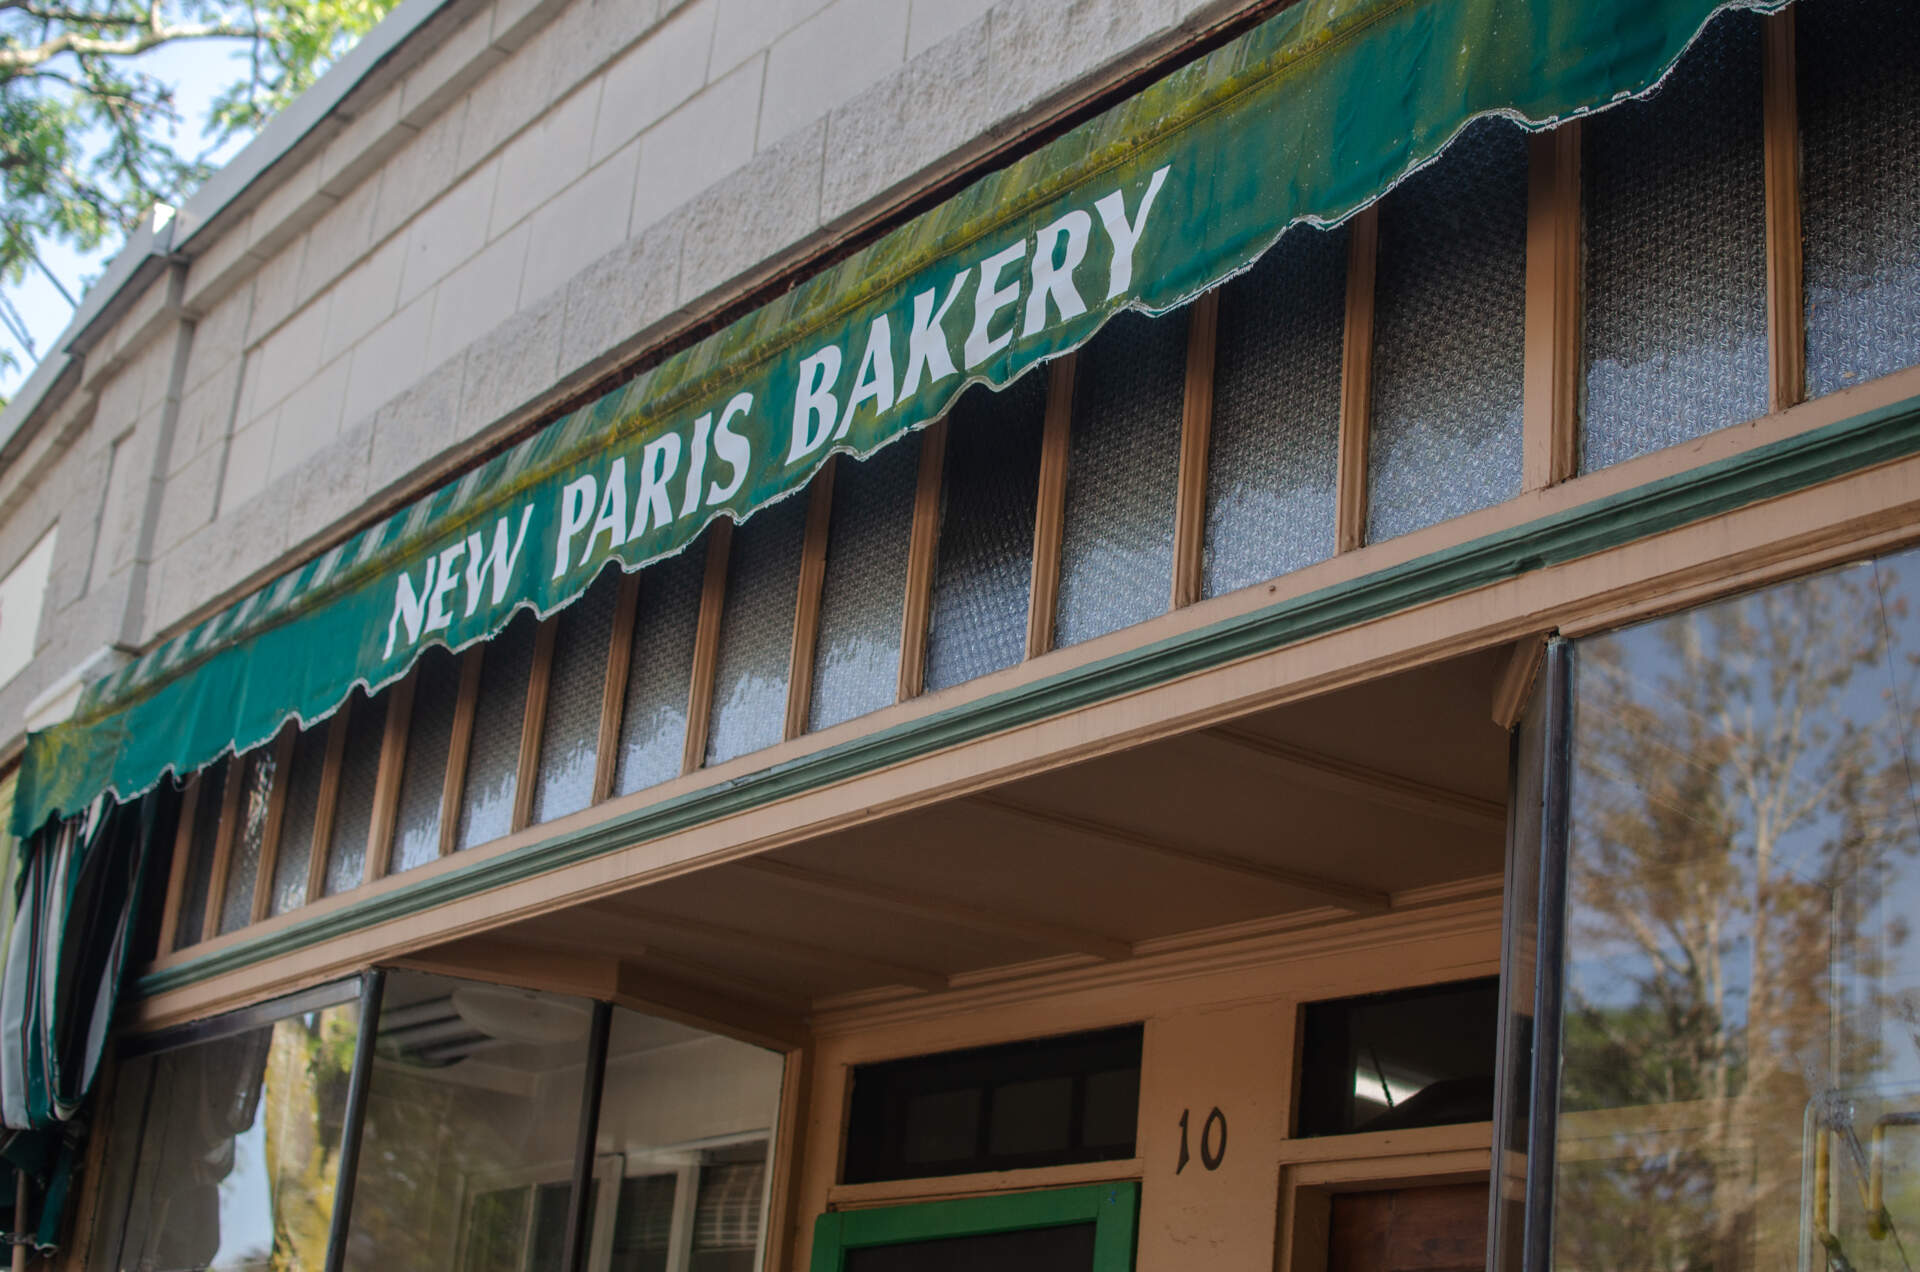 New Paris Bakery in Brookline Village was one of the oldest shops in town. (Sharon Brody/WBUR)